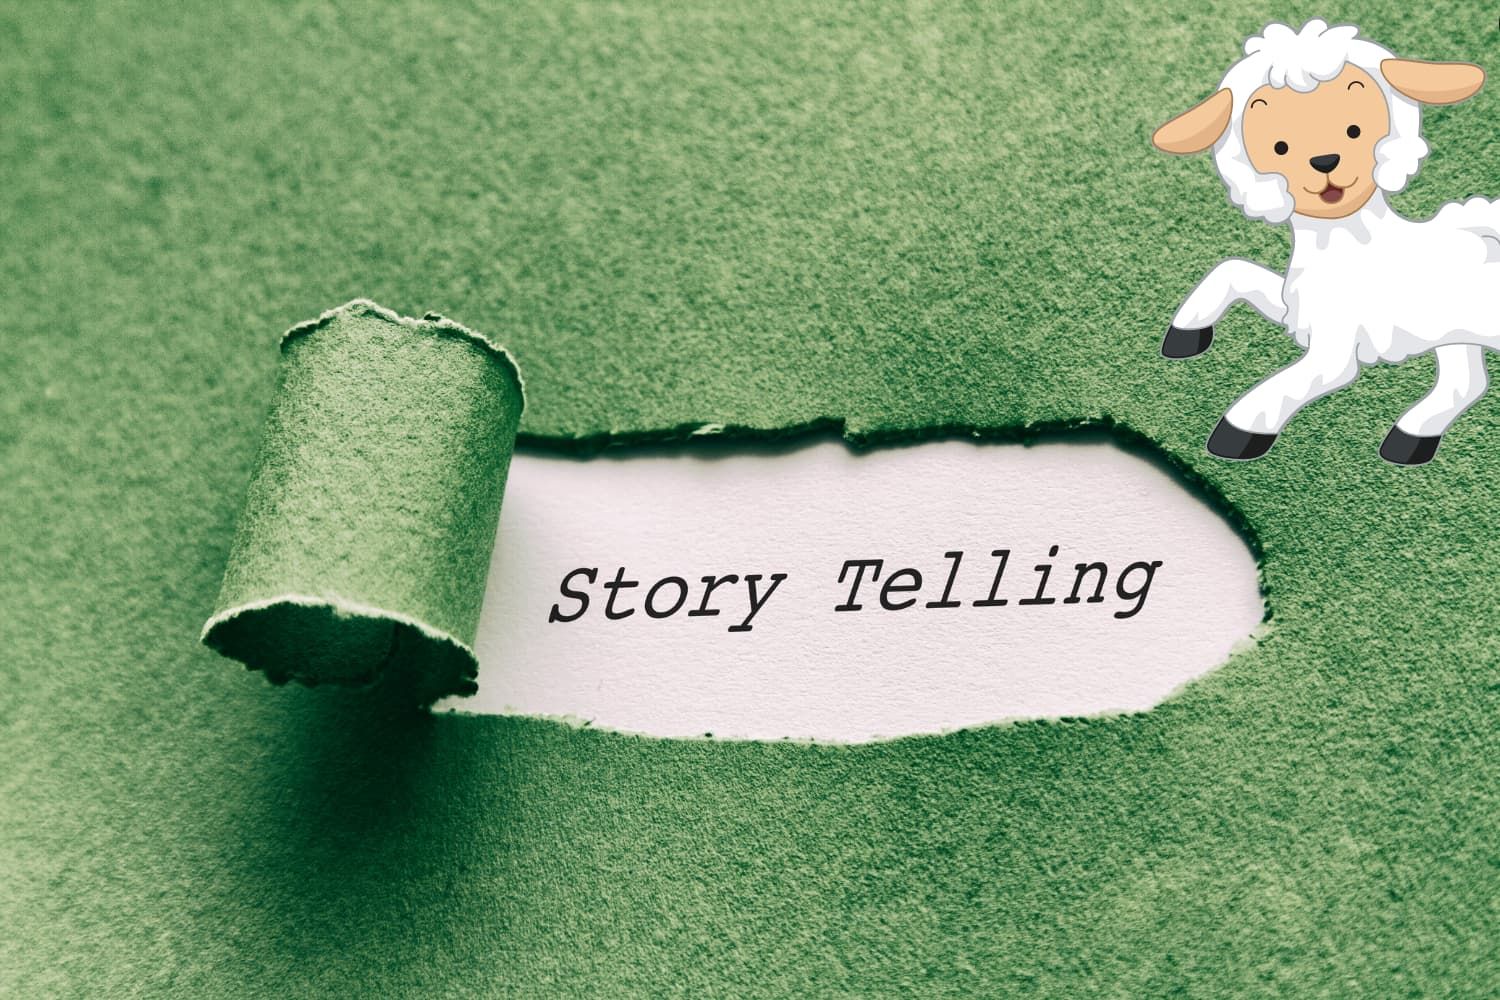 Storytelling%20tips%20-%20NT%20Parable%20of%20the%20lost%20sheep%20-%20Four%20tips%20to%20help%20you%20tell%20the%20story-0b70d295 The lost sheep